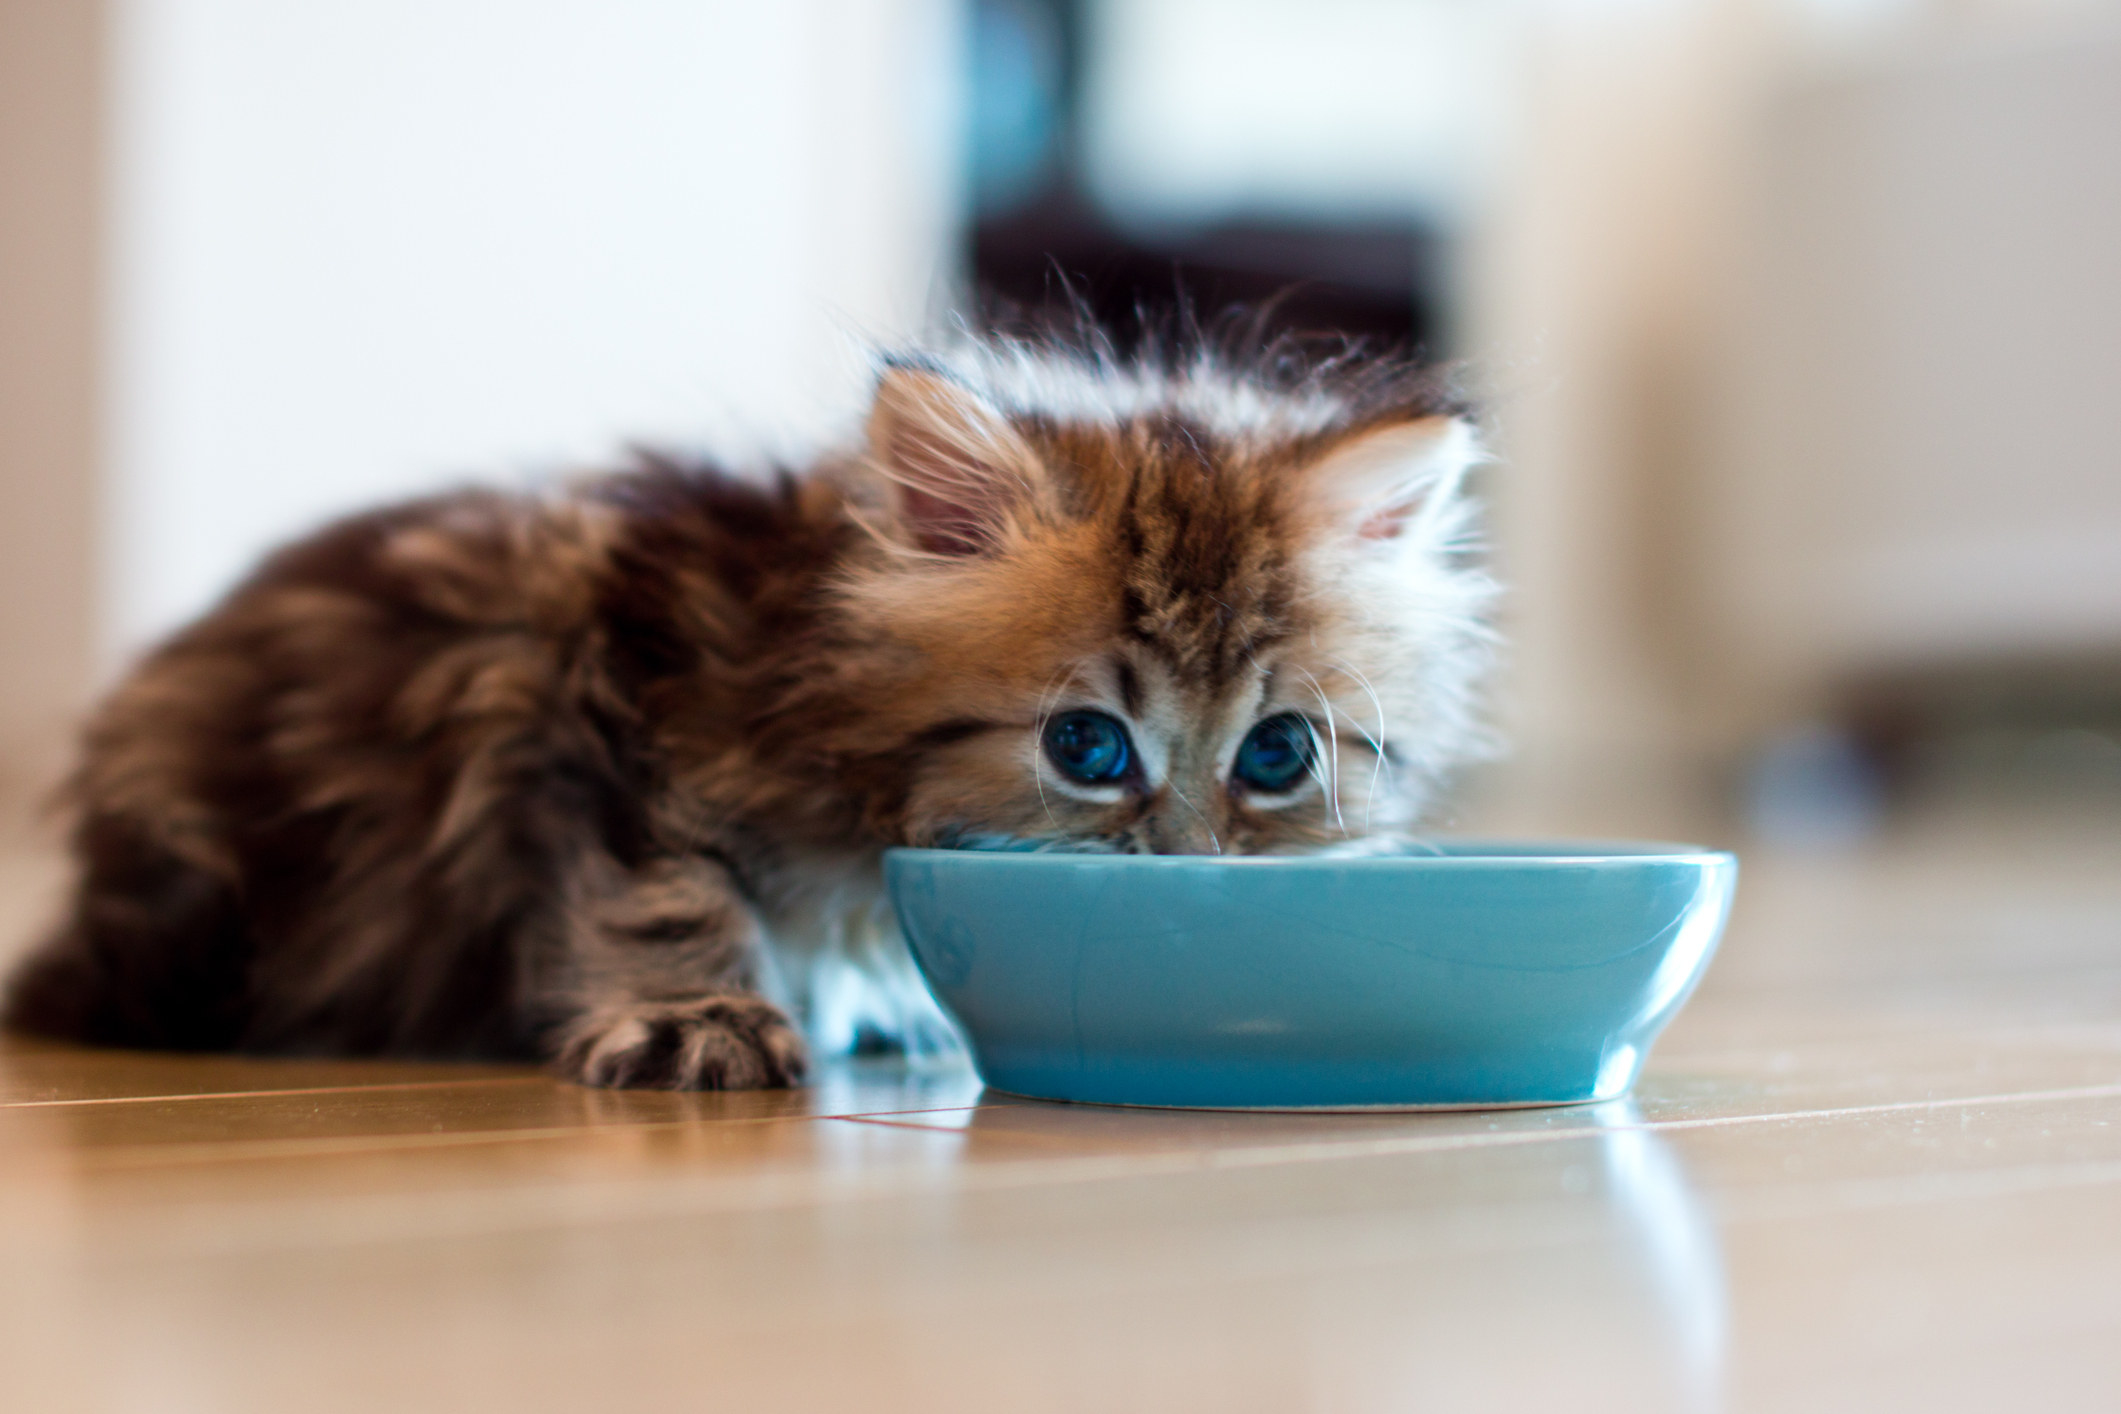 A kitten eating out of a bowl